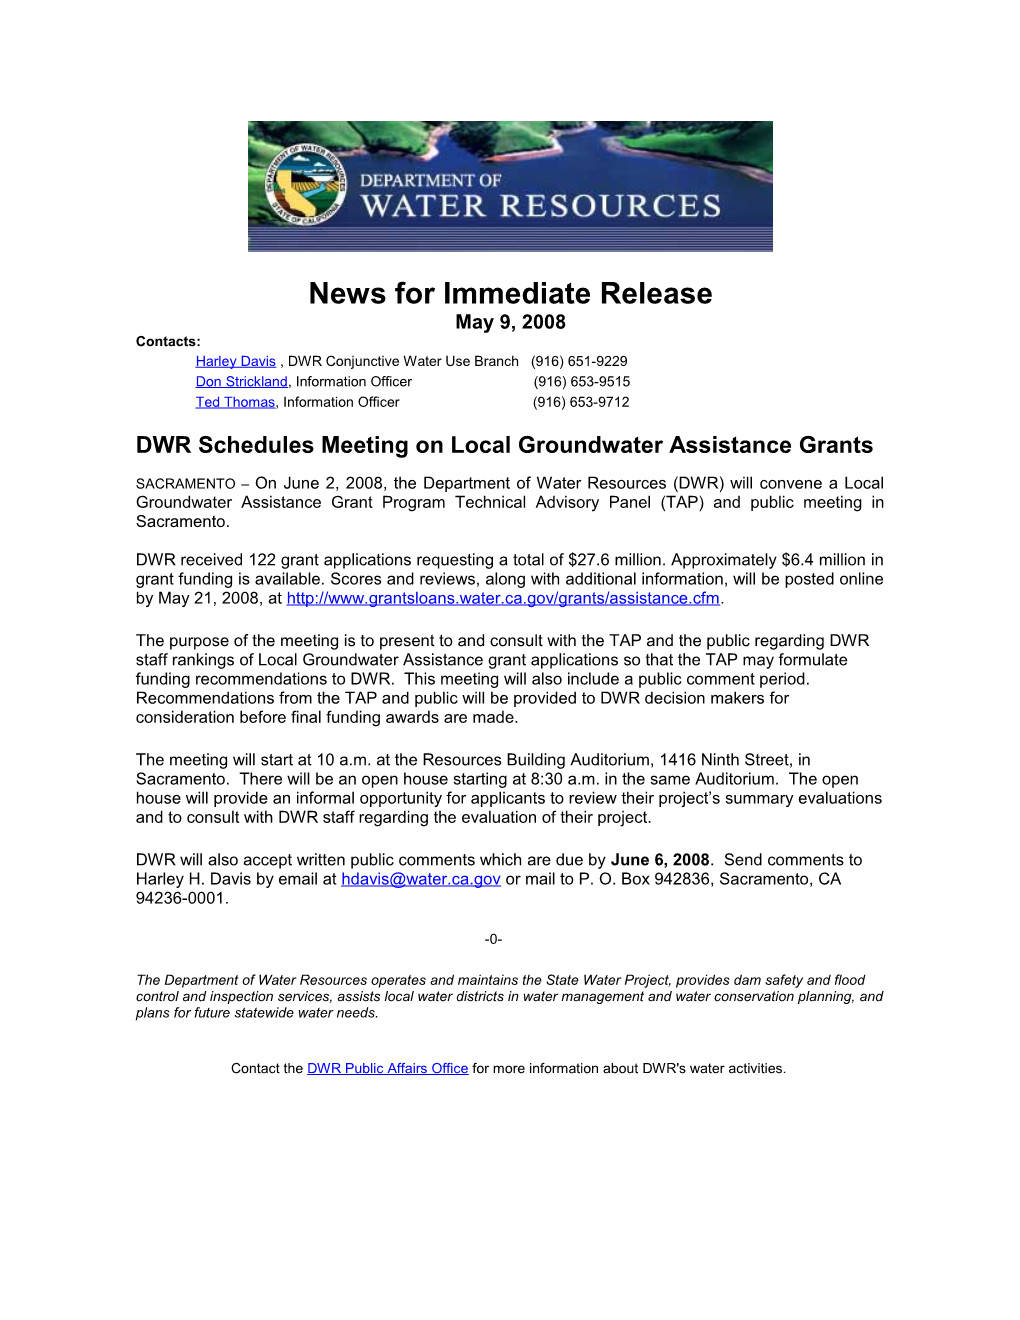 DWR Schedules Meeting on Local Groundwater Assistance Grants